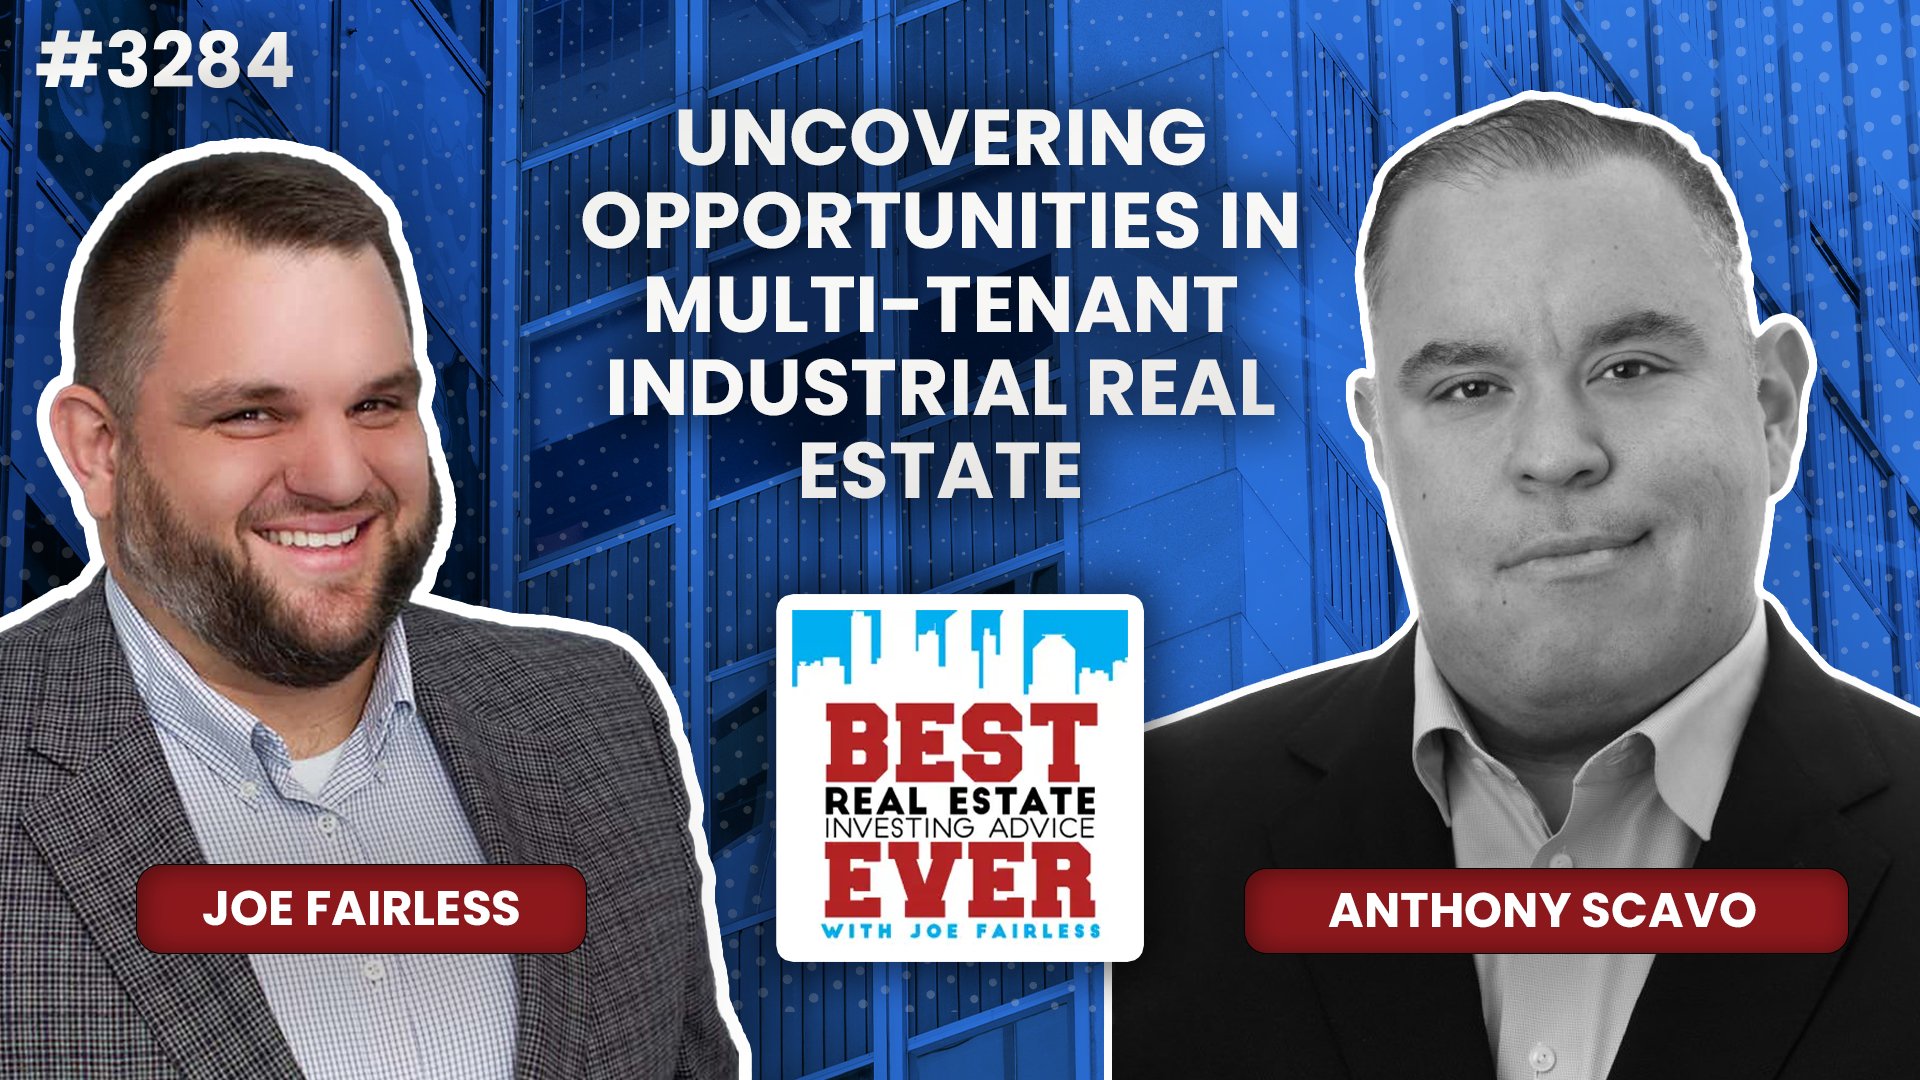 JF3284: Anthony Scavo — Uncovering Opportunities in Multi-Tenant Industrial Real Estate